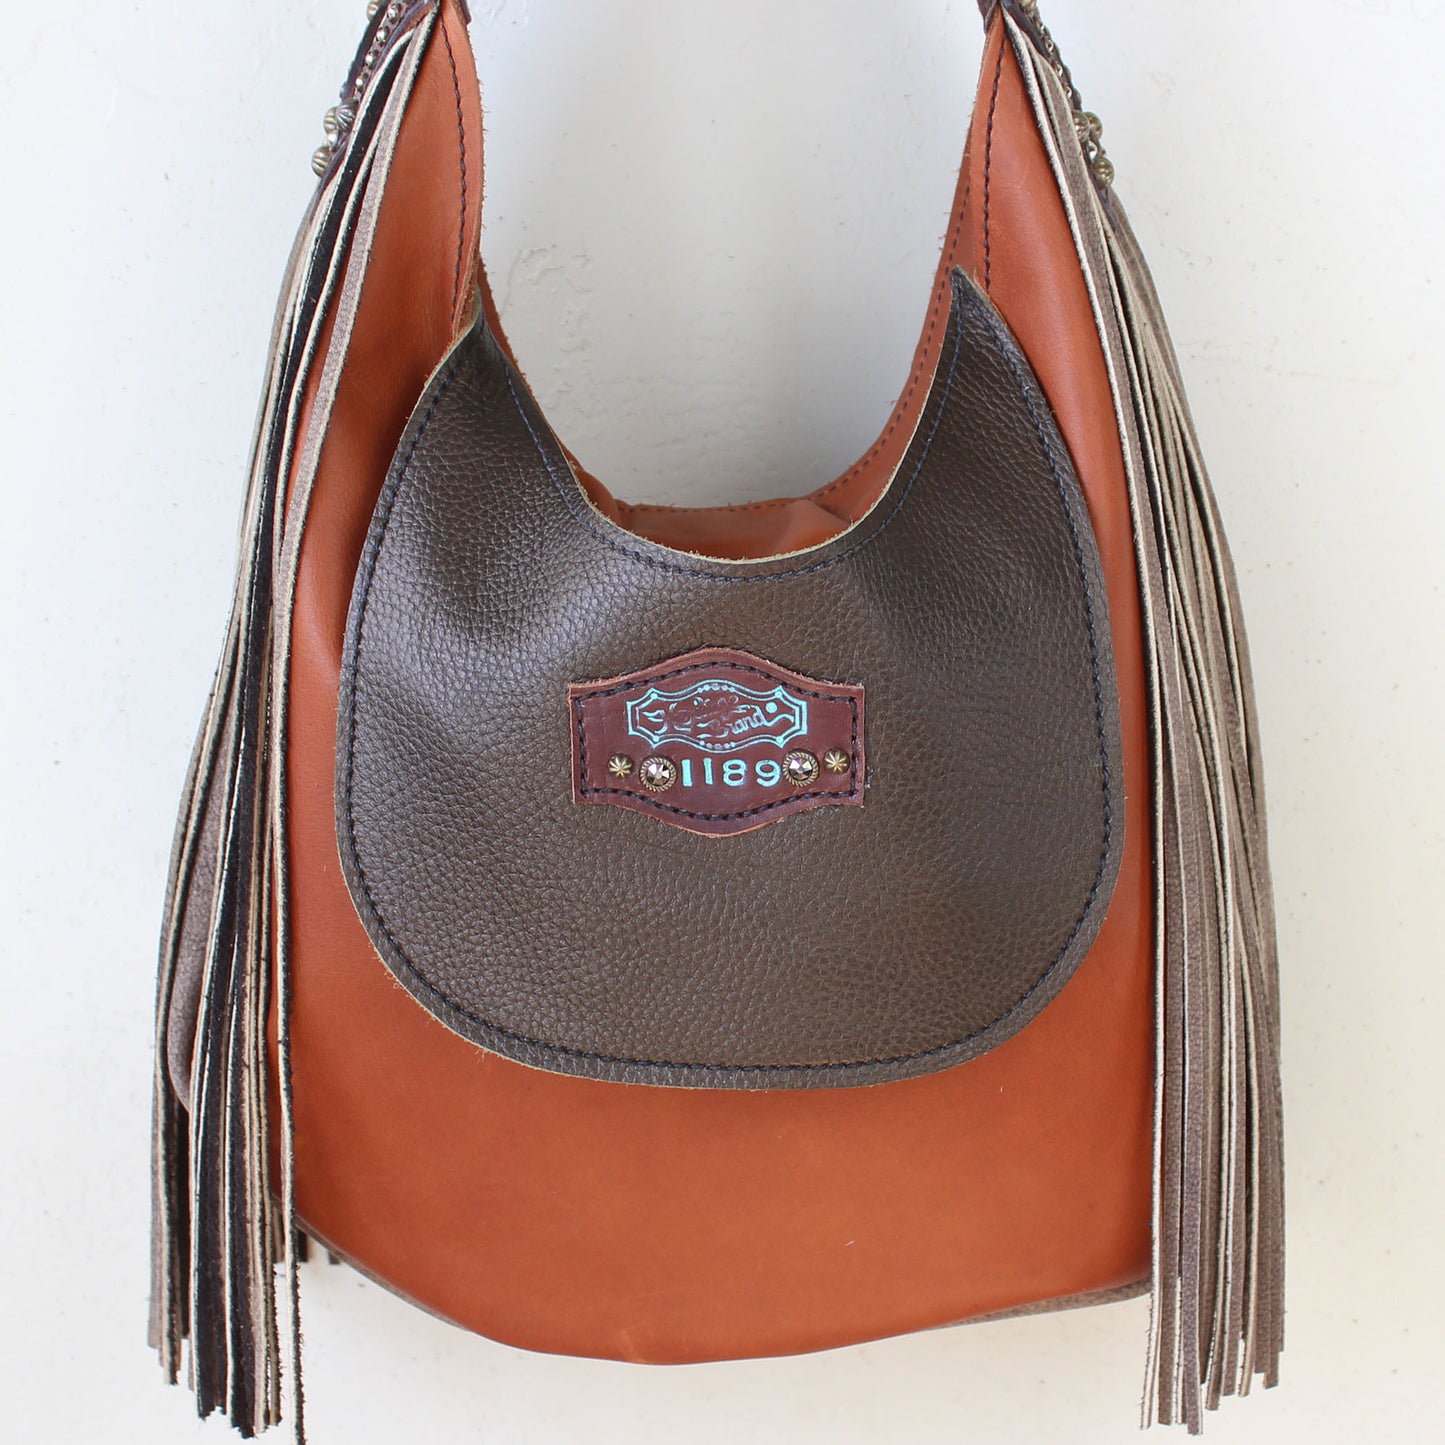 
                  
                    Brown and tan leather Heritage Brand marilyn bag #1189 with fringe details and a brand logo on the front.
                  
                